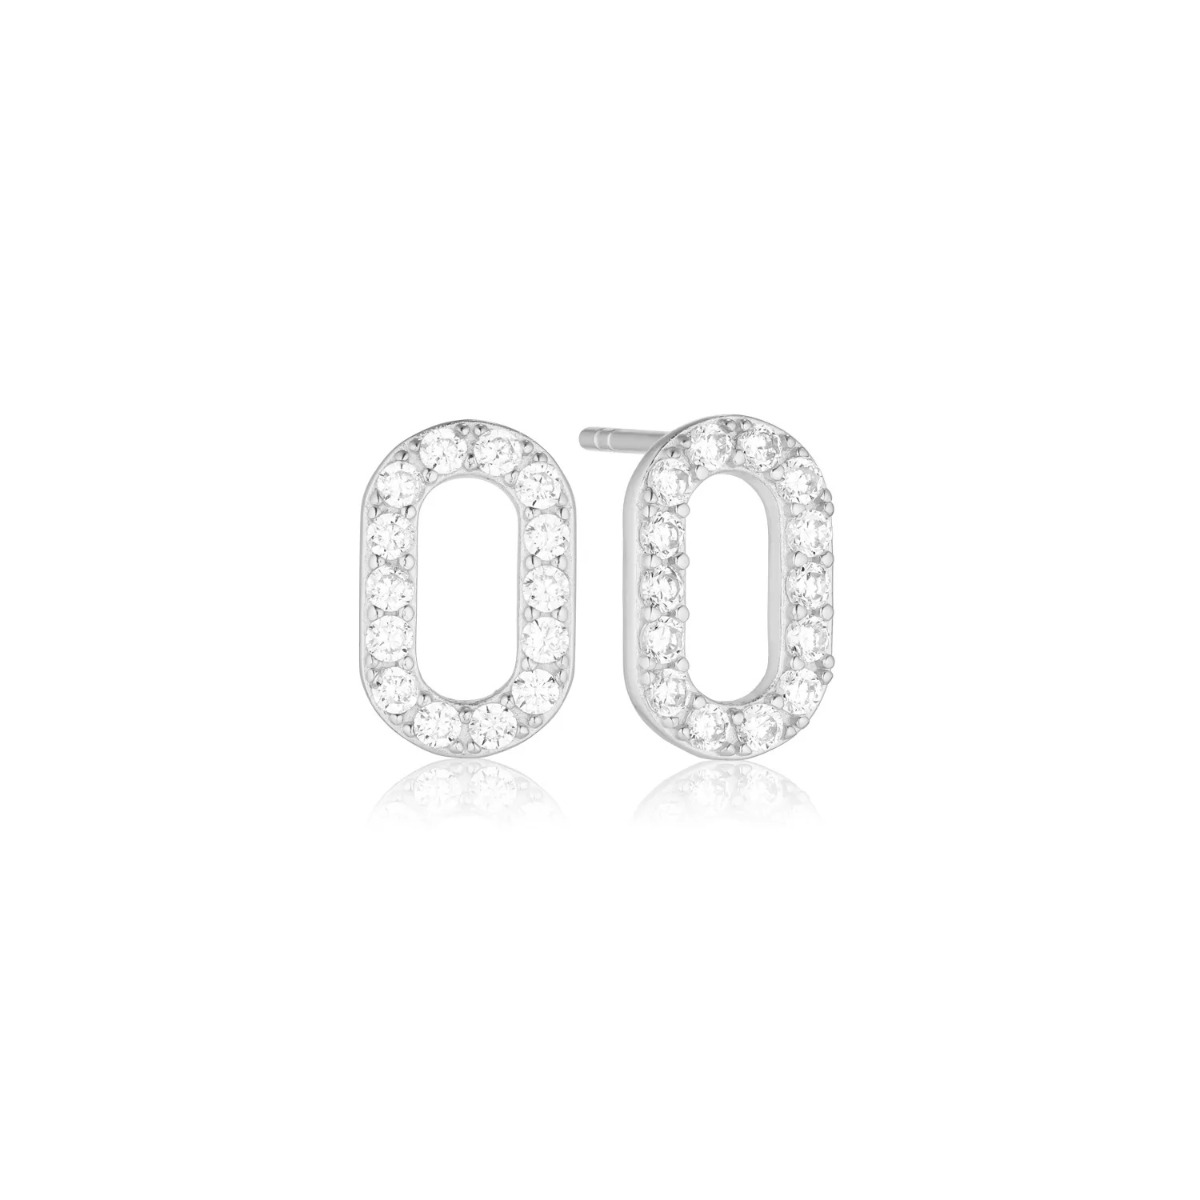 Sif Jakobs Capizza Silver Earrings with White Zirconia